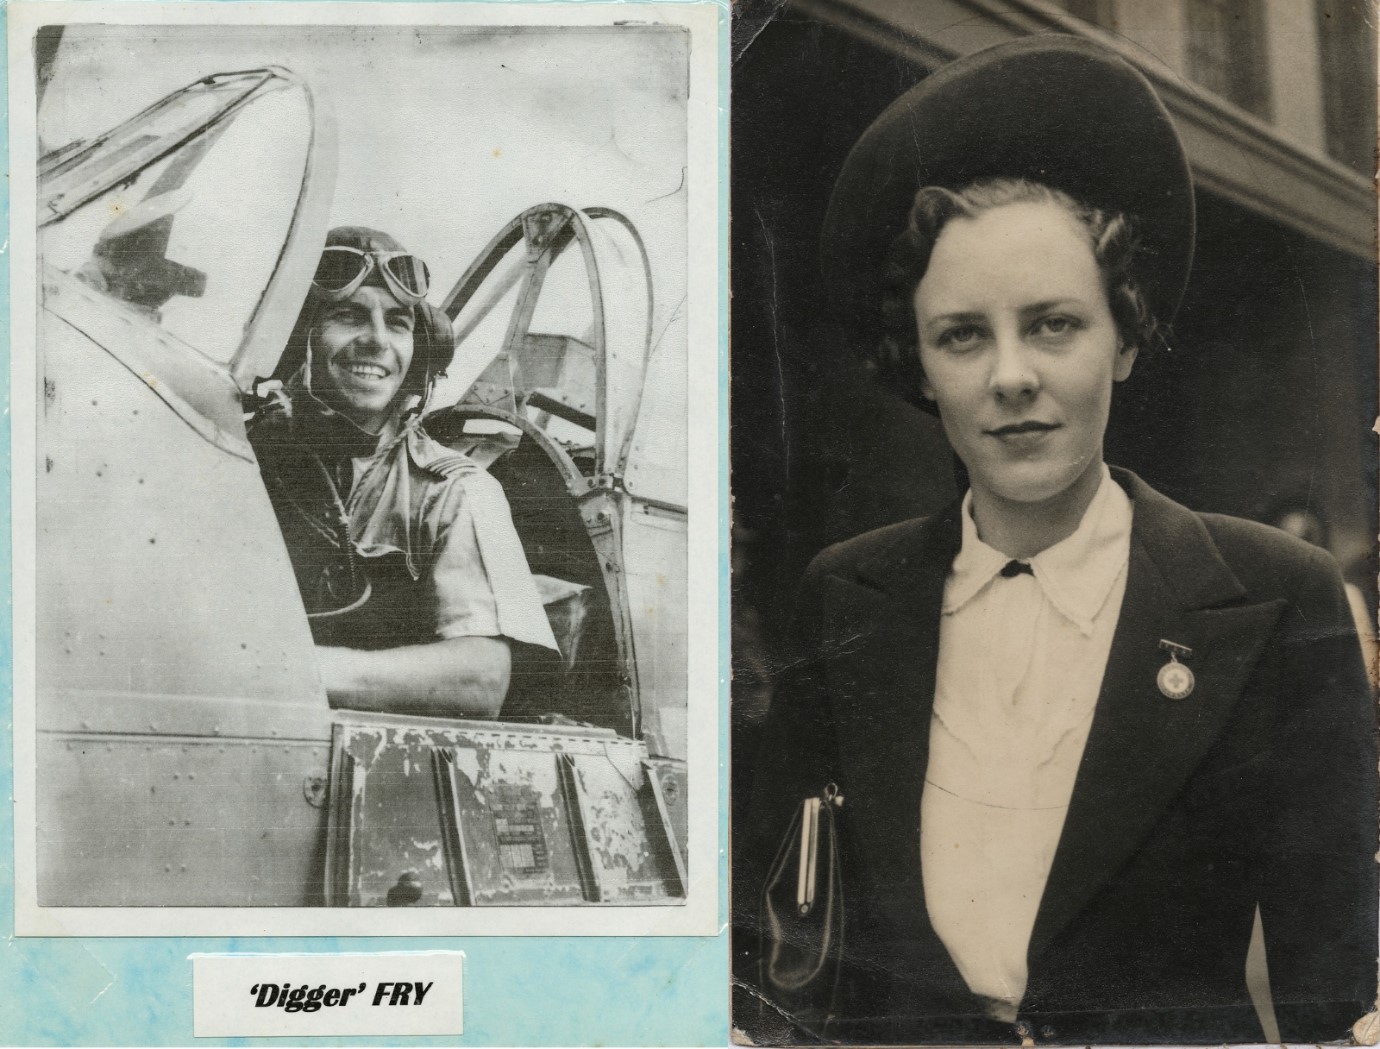 Photo of Charles Fry in the cockpit of WWII RAF plane, and a photo of Beryl Smith